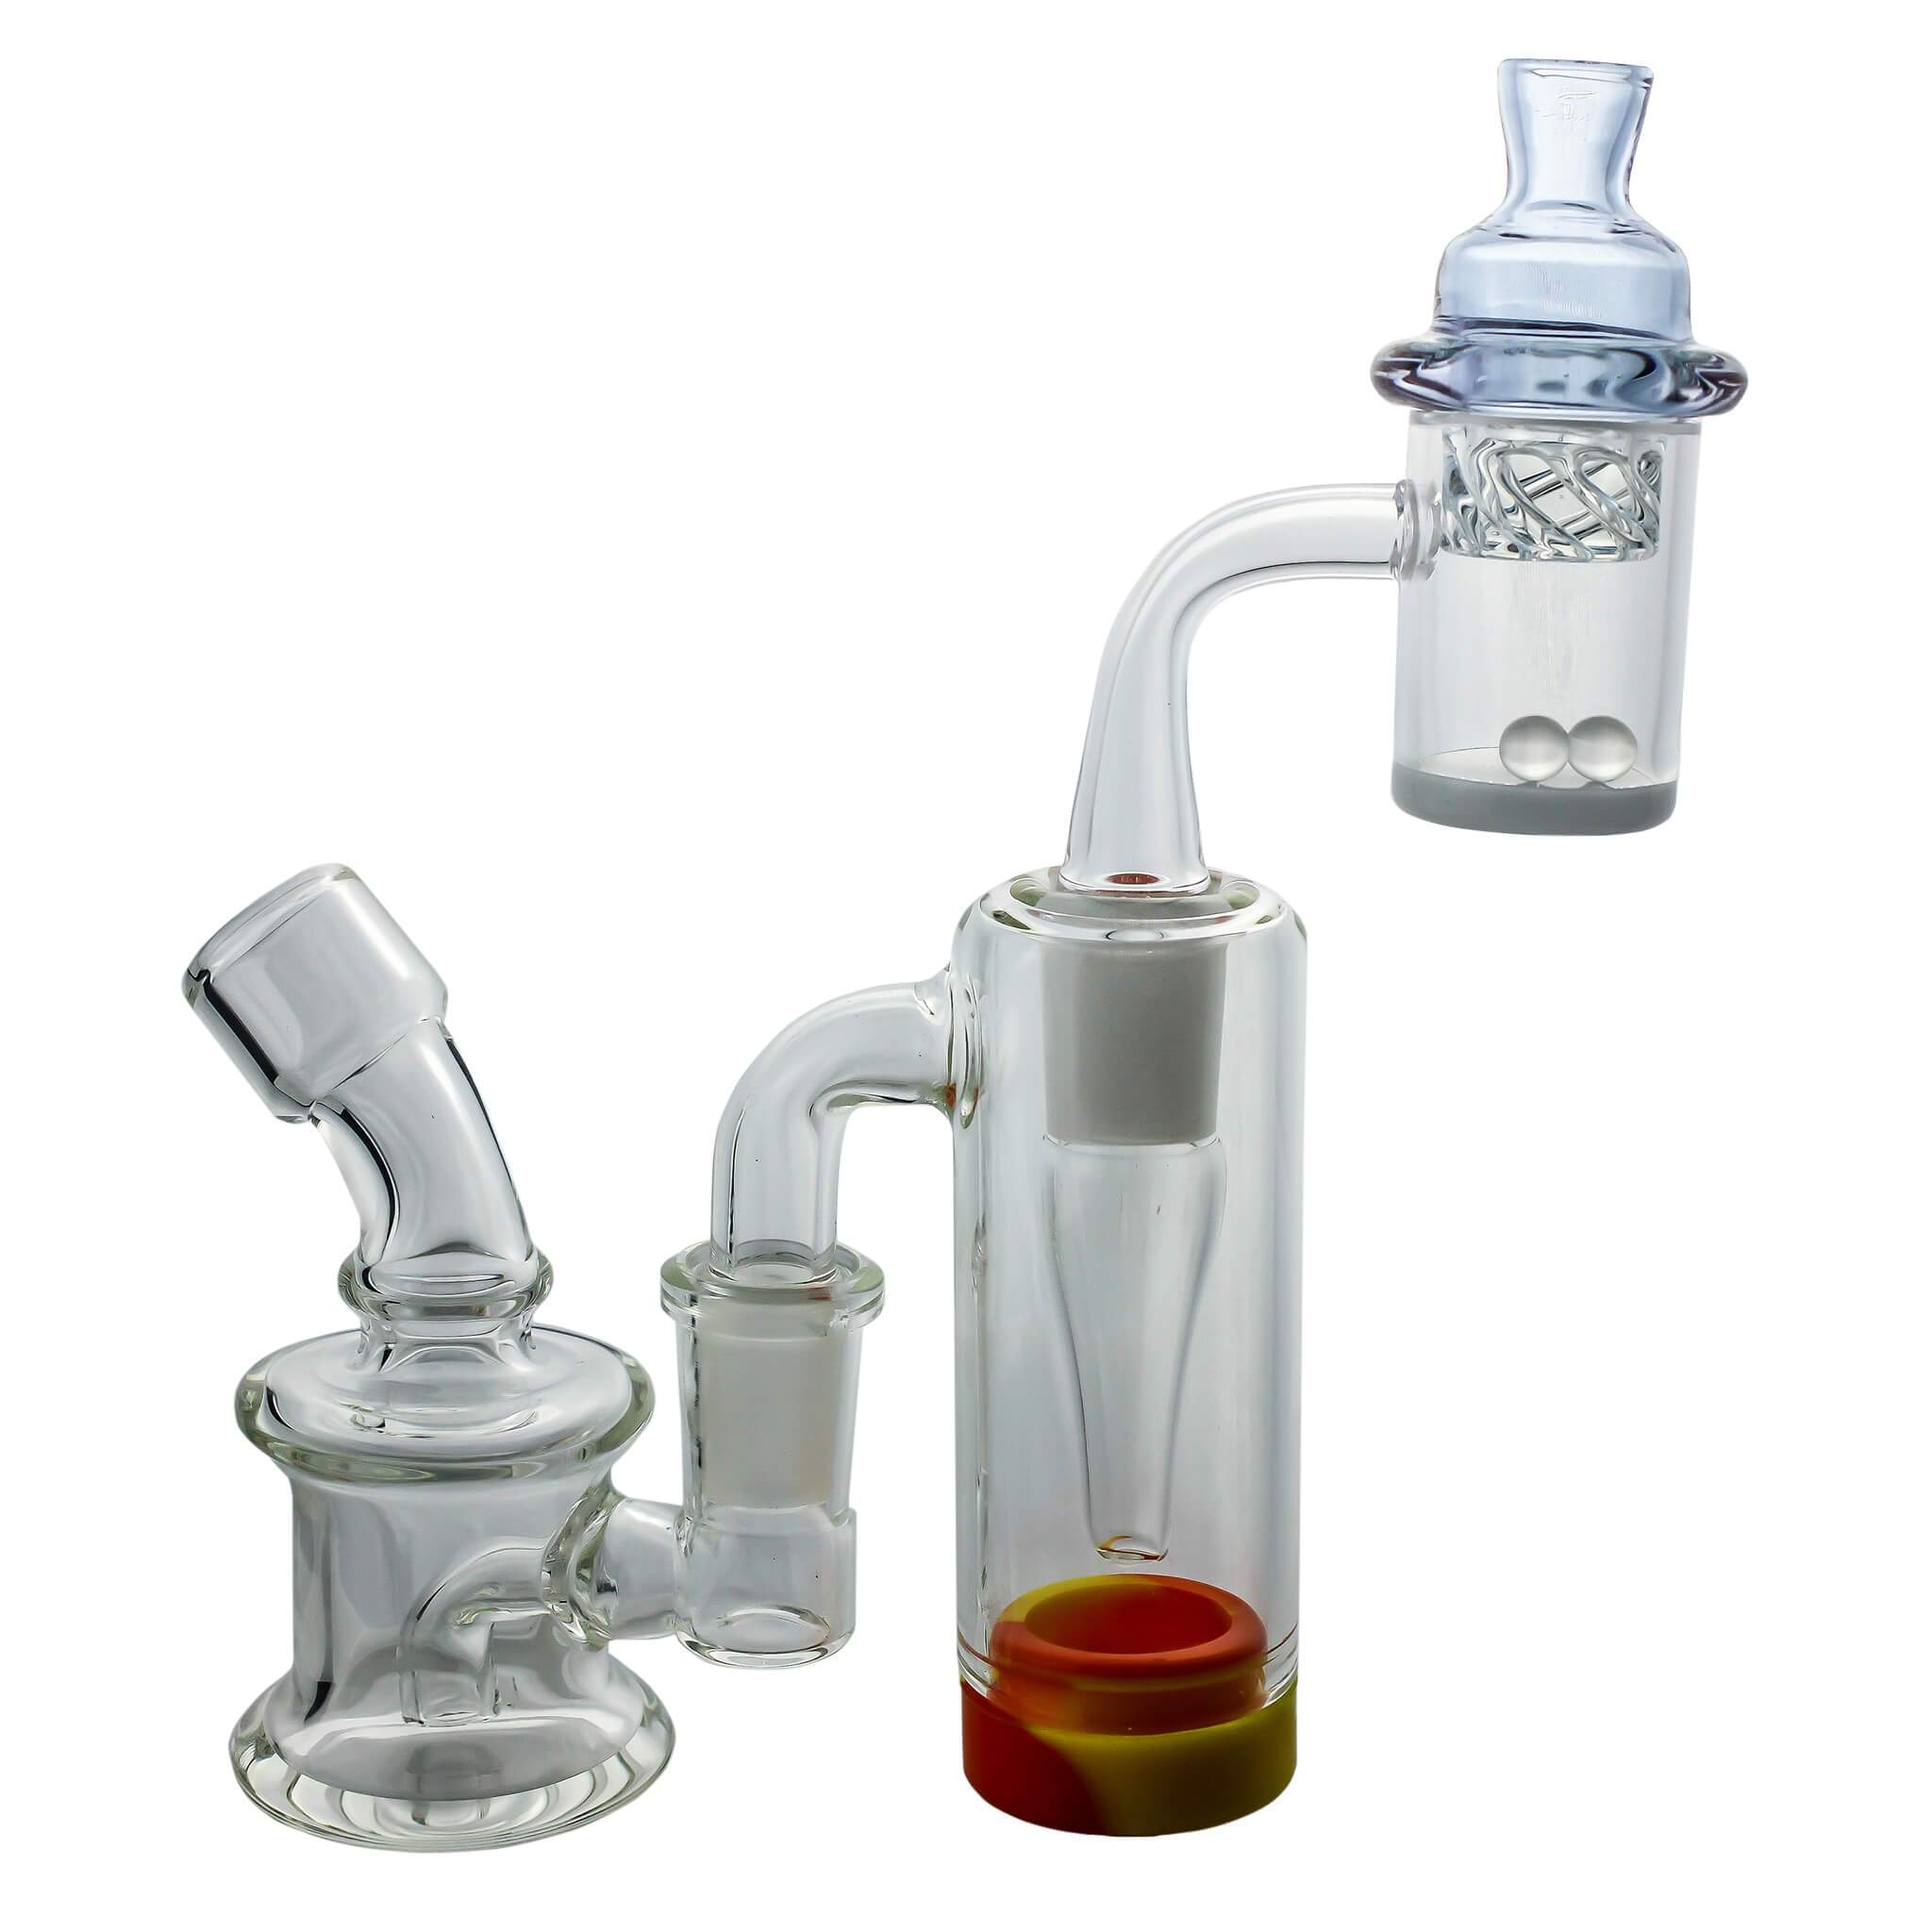 Dab Accessories For Sale Online - Houston, TX